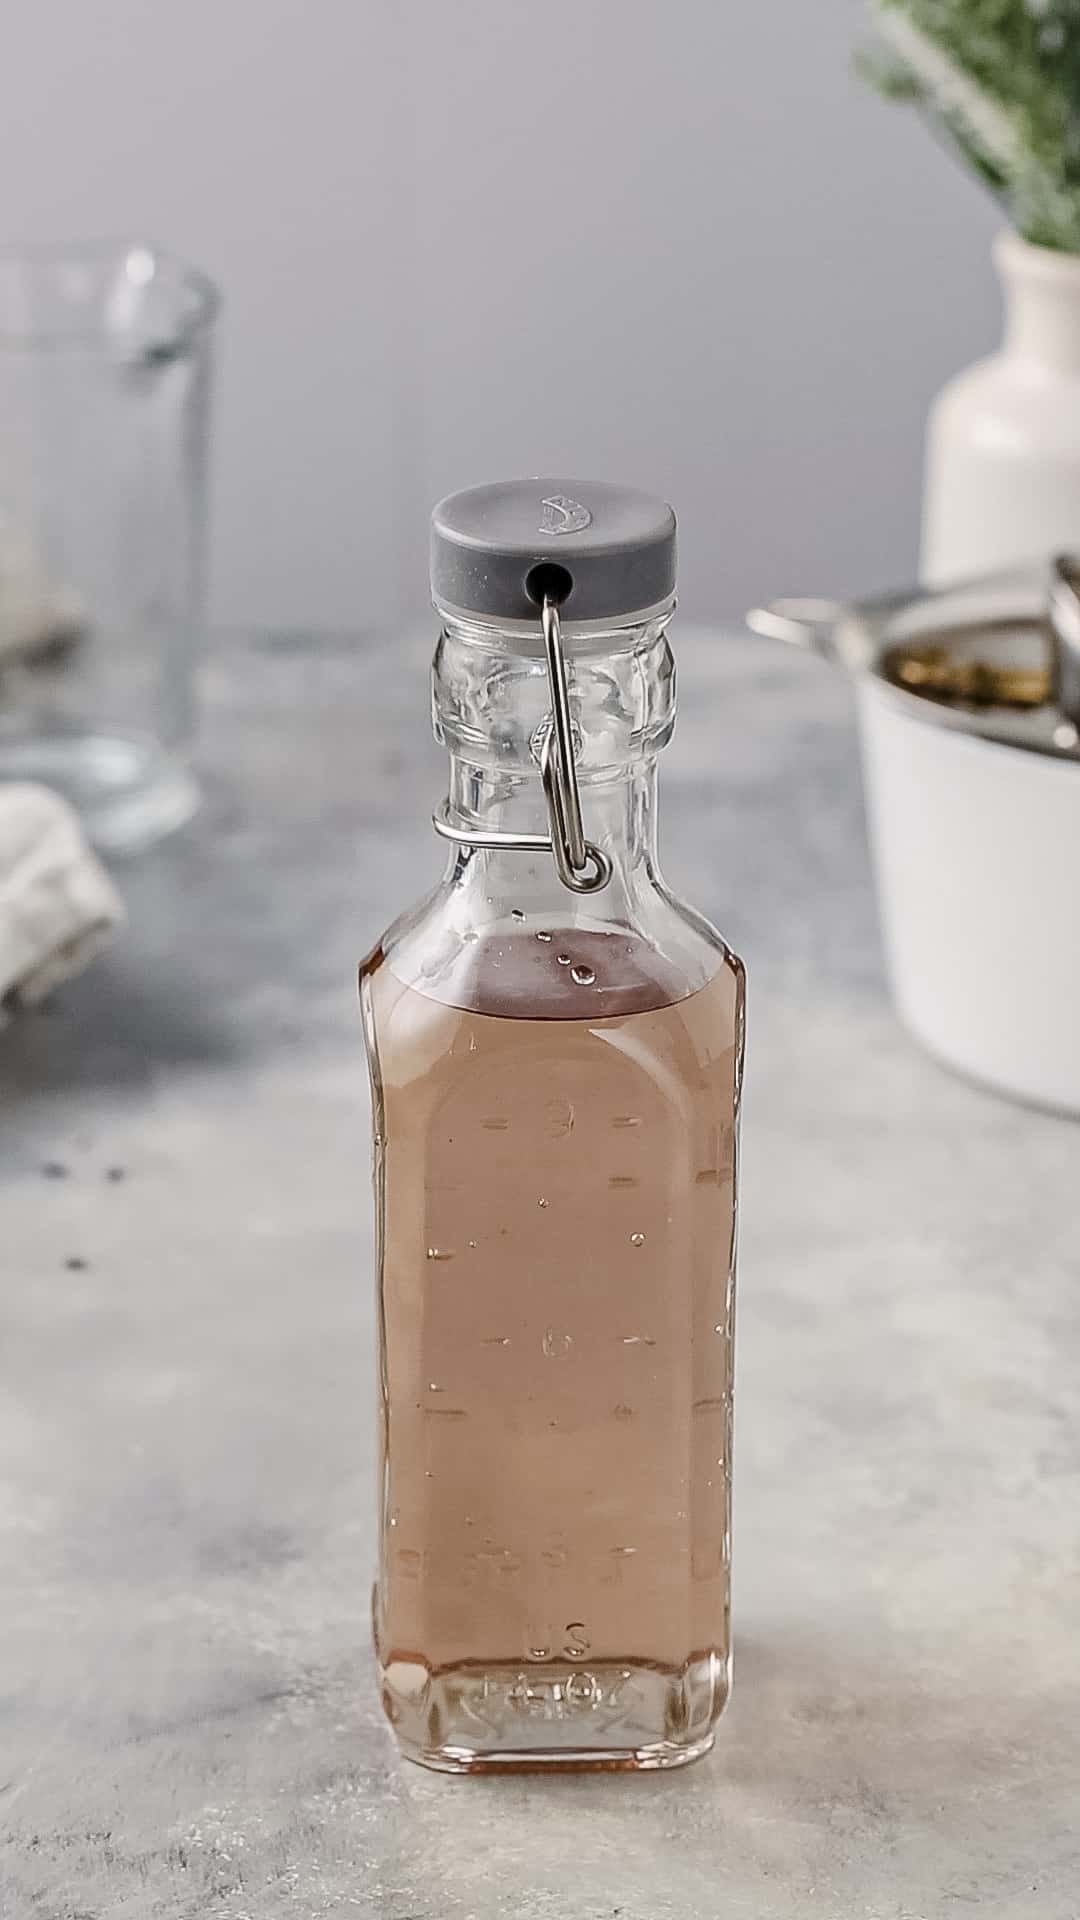 Lavender syrup in a sealed glass bottle on a countertop.